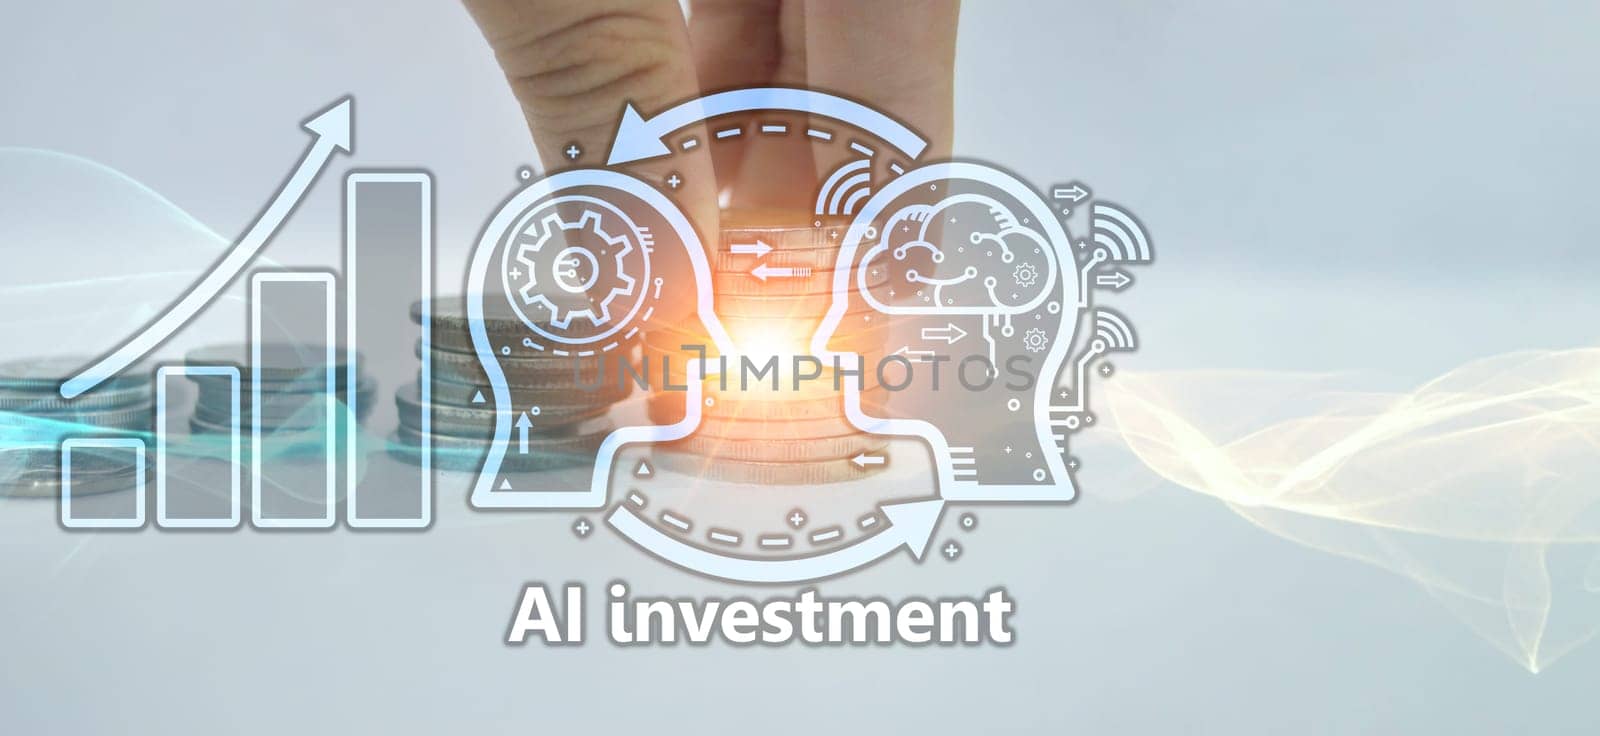 Investment ideas using artificial intelligence AI